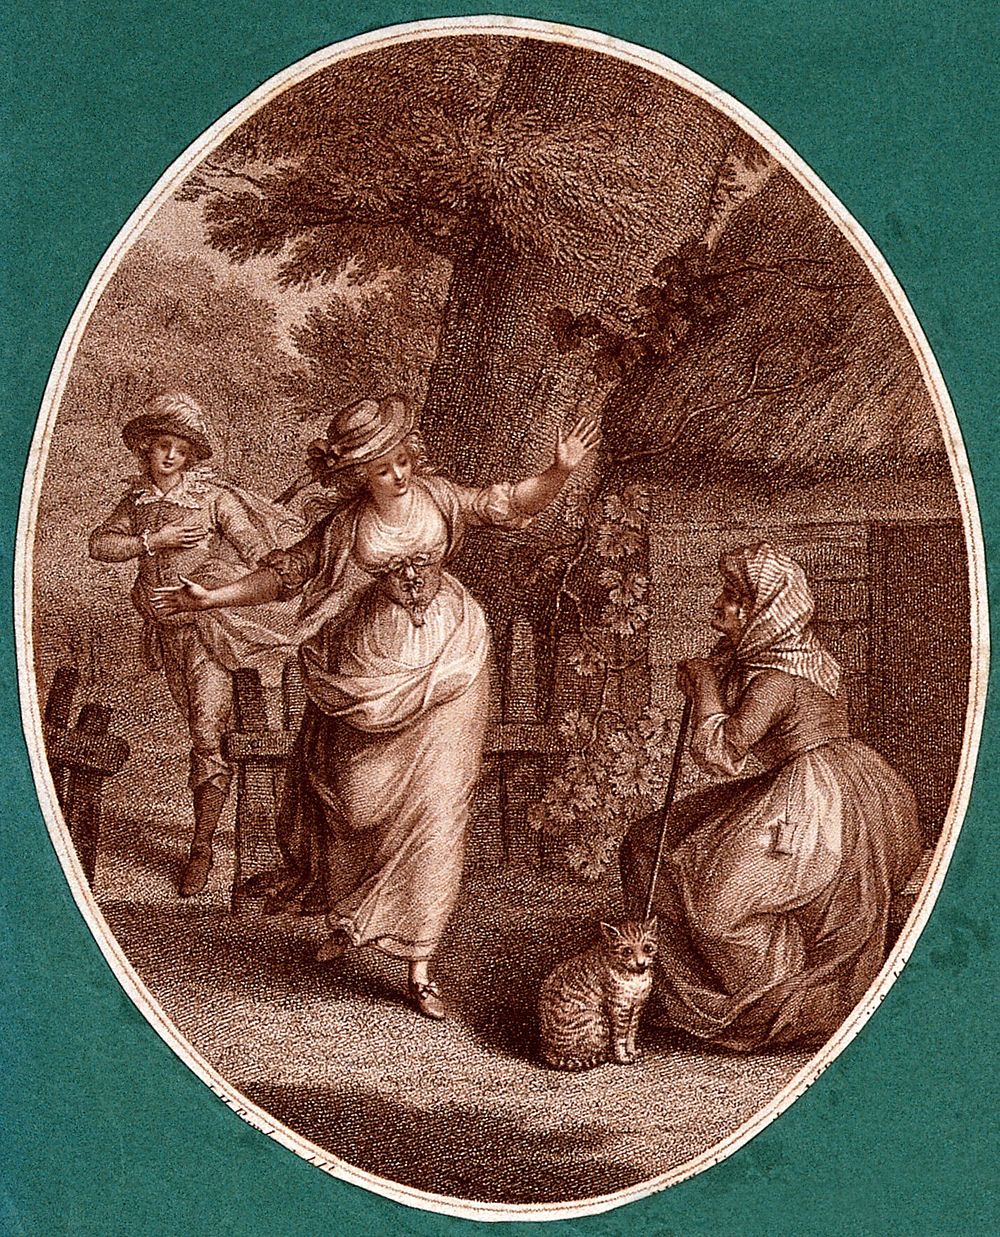 A girl closely followed by a young man rushes towards an old lady sitting on a stool outside a cottage. Stipple engraving.